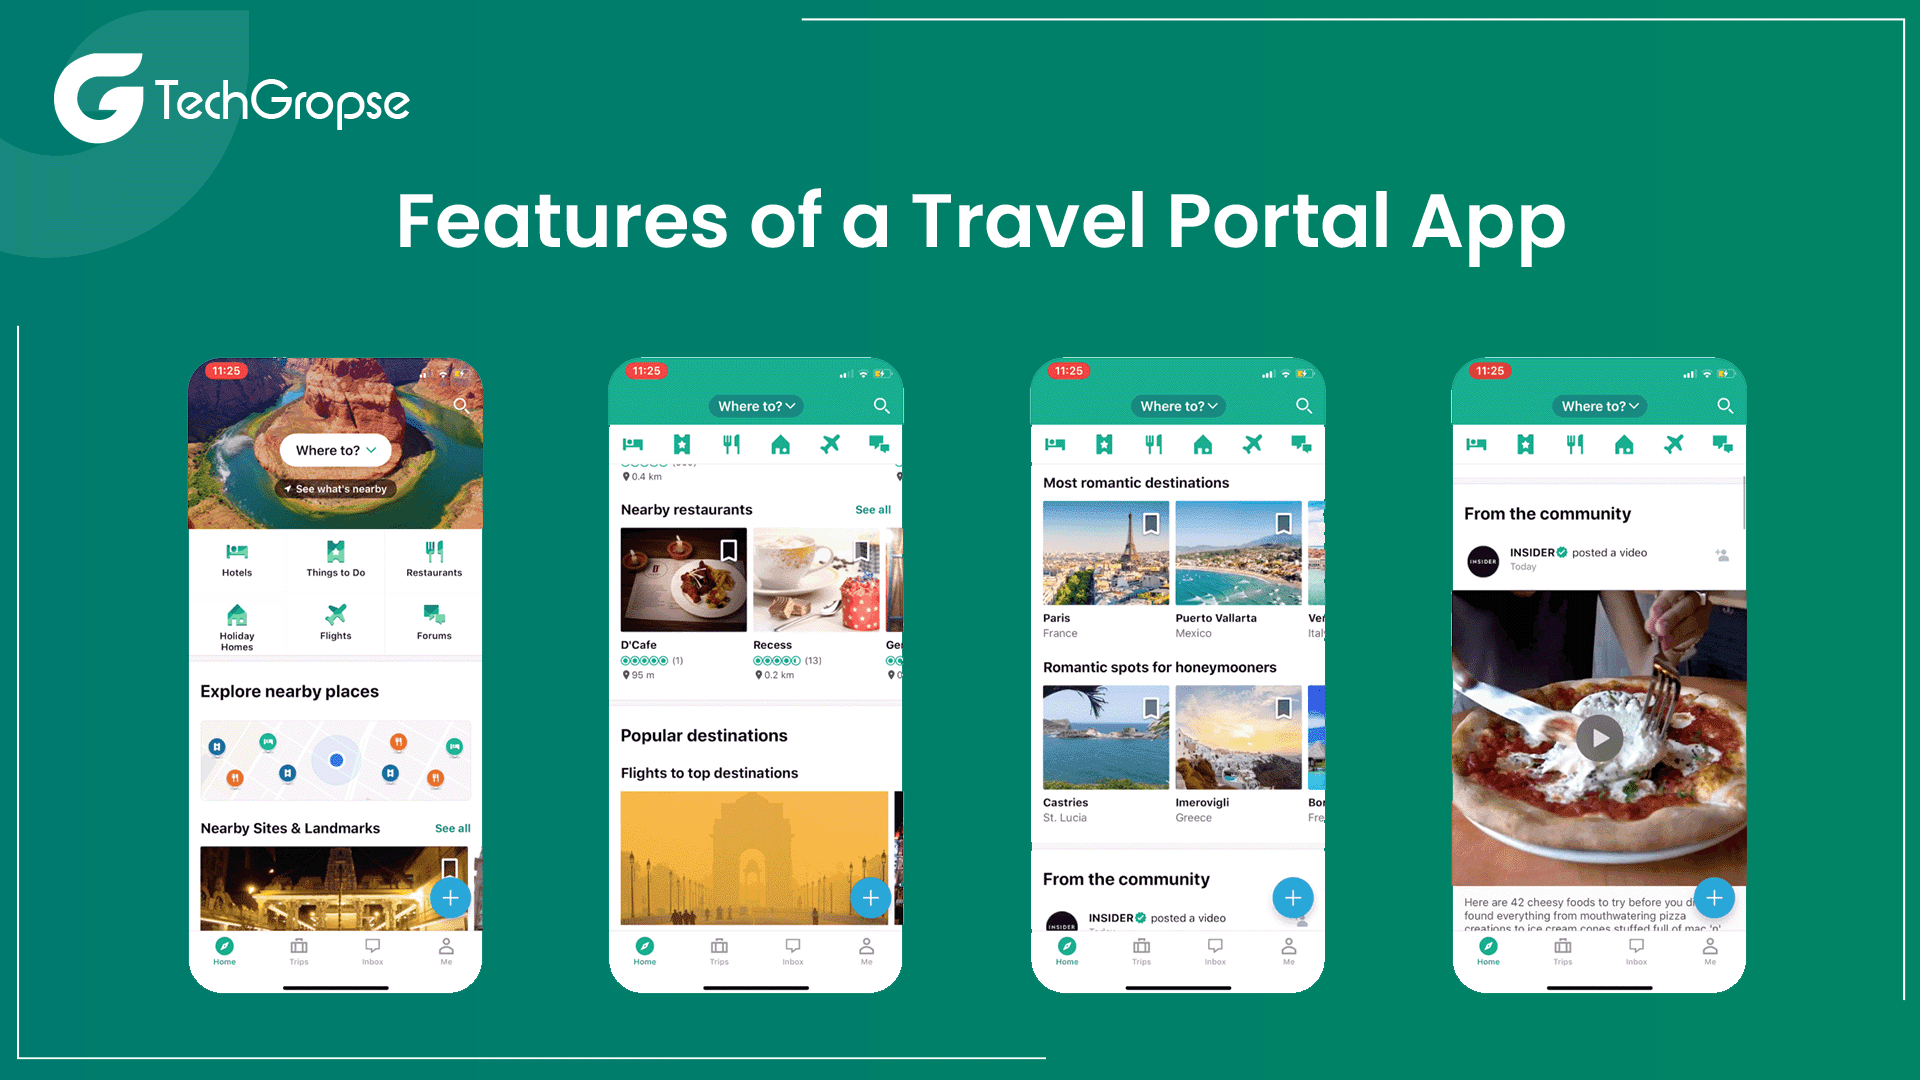 Features of a Travel Portal App